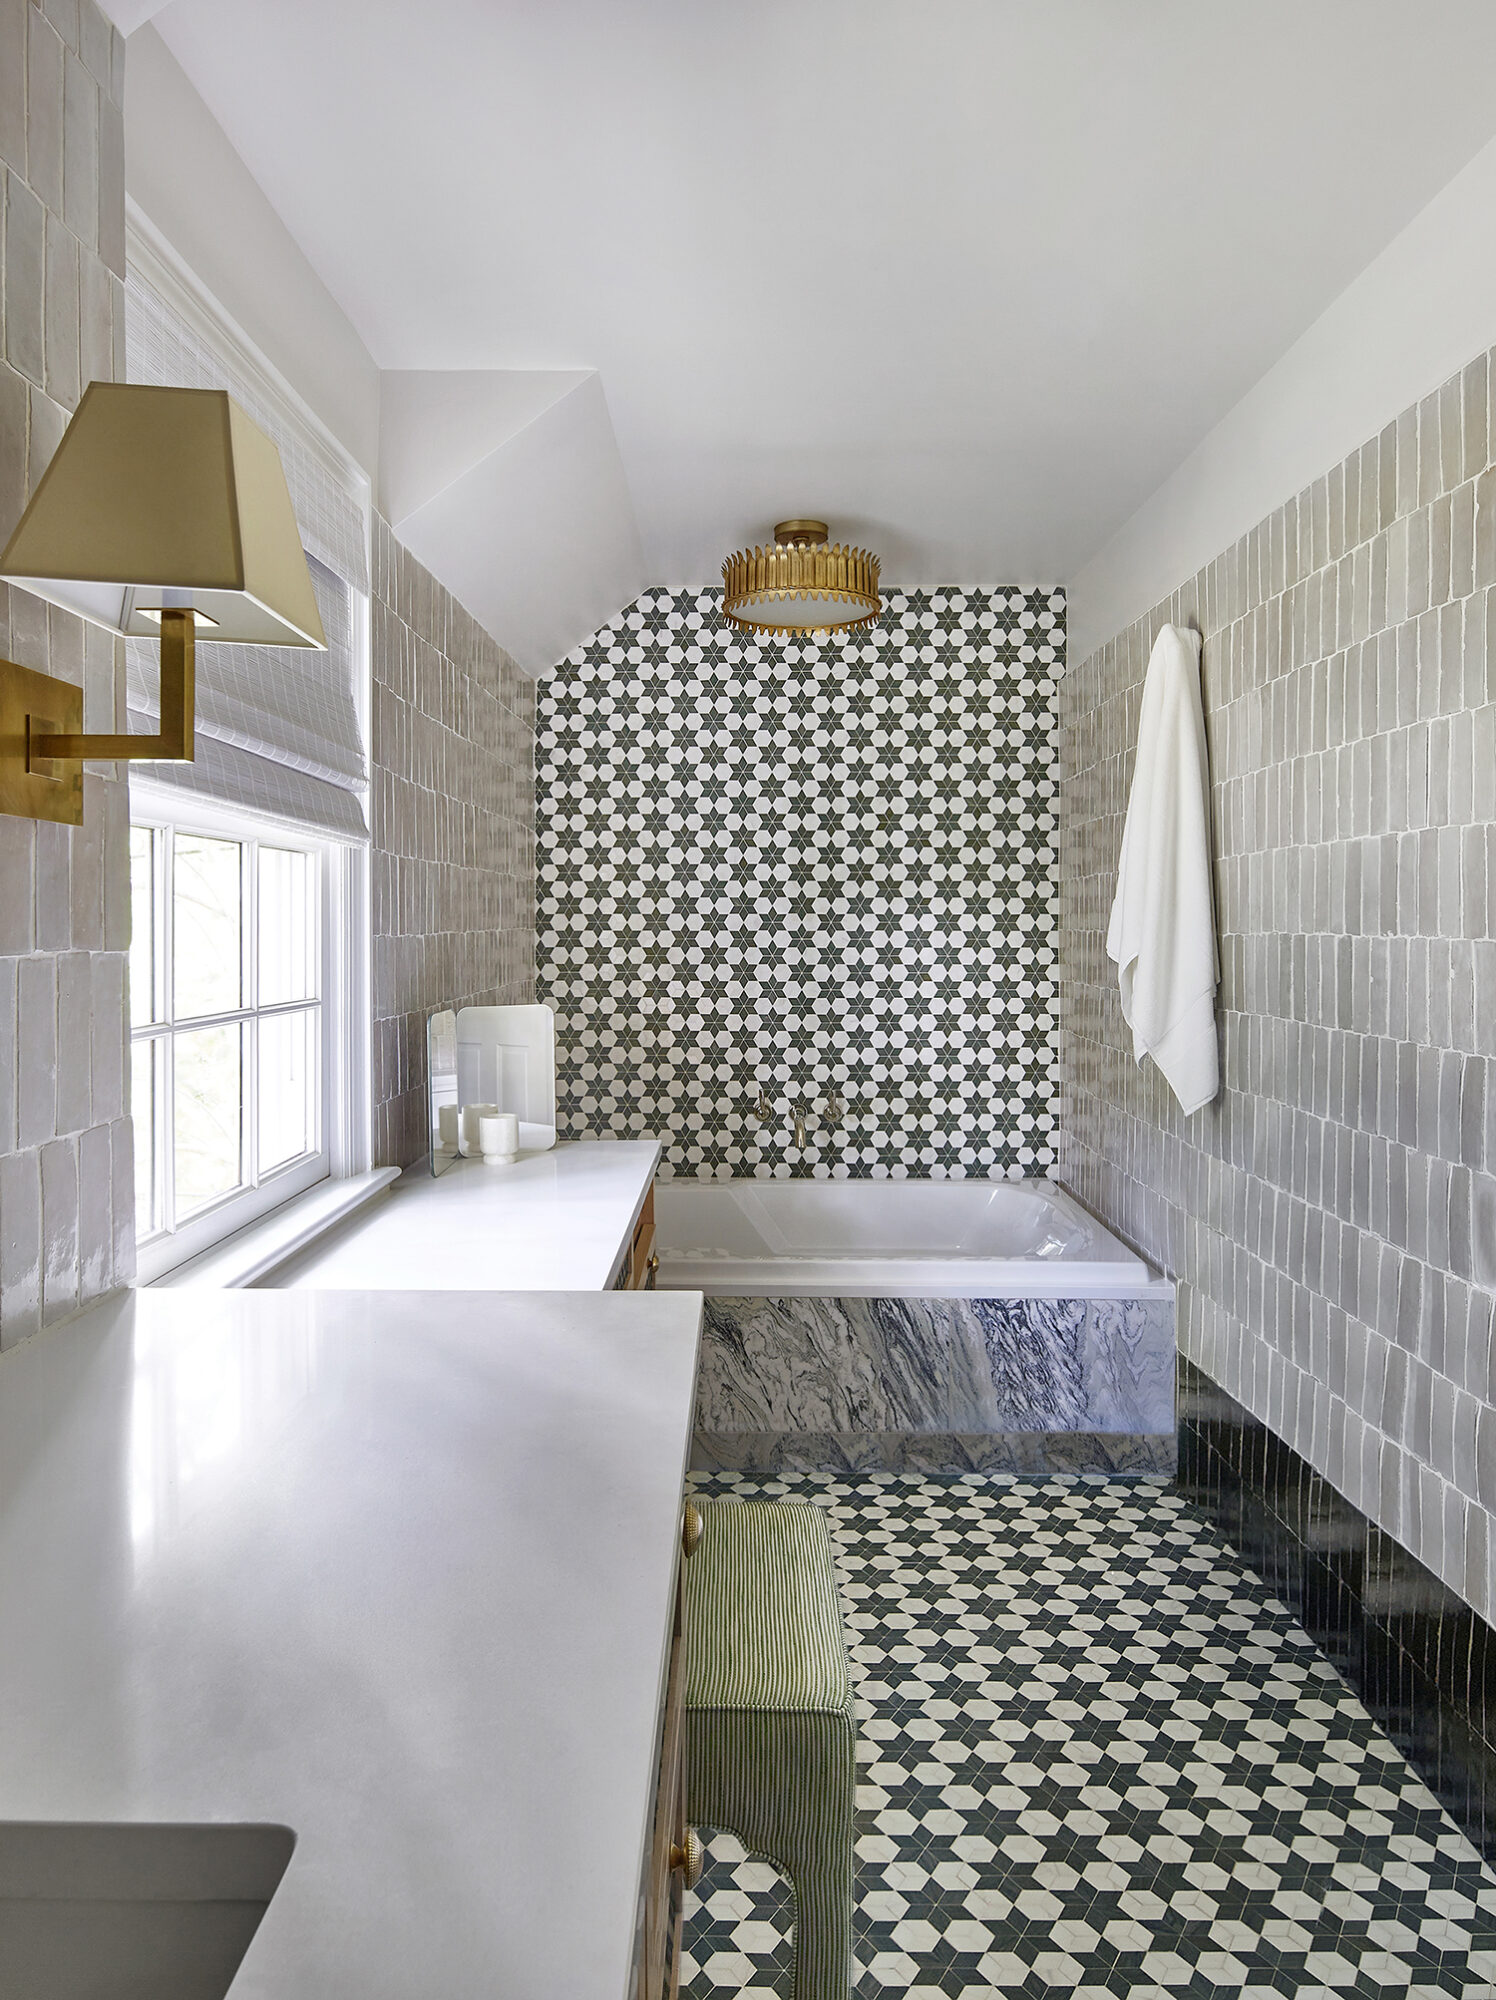 mixed patterns and tiles in a white bathroom by virginia toledo gellar